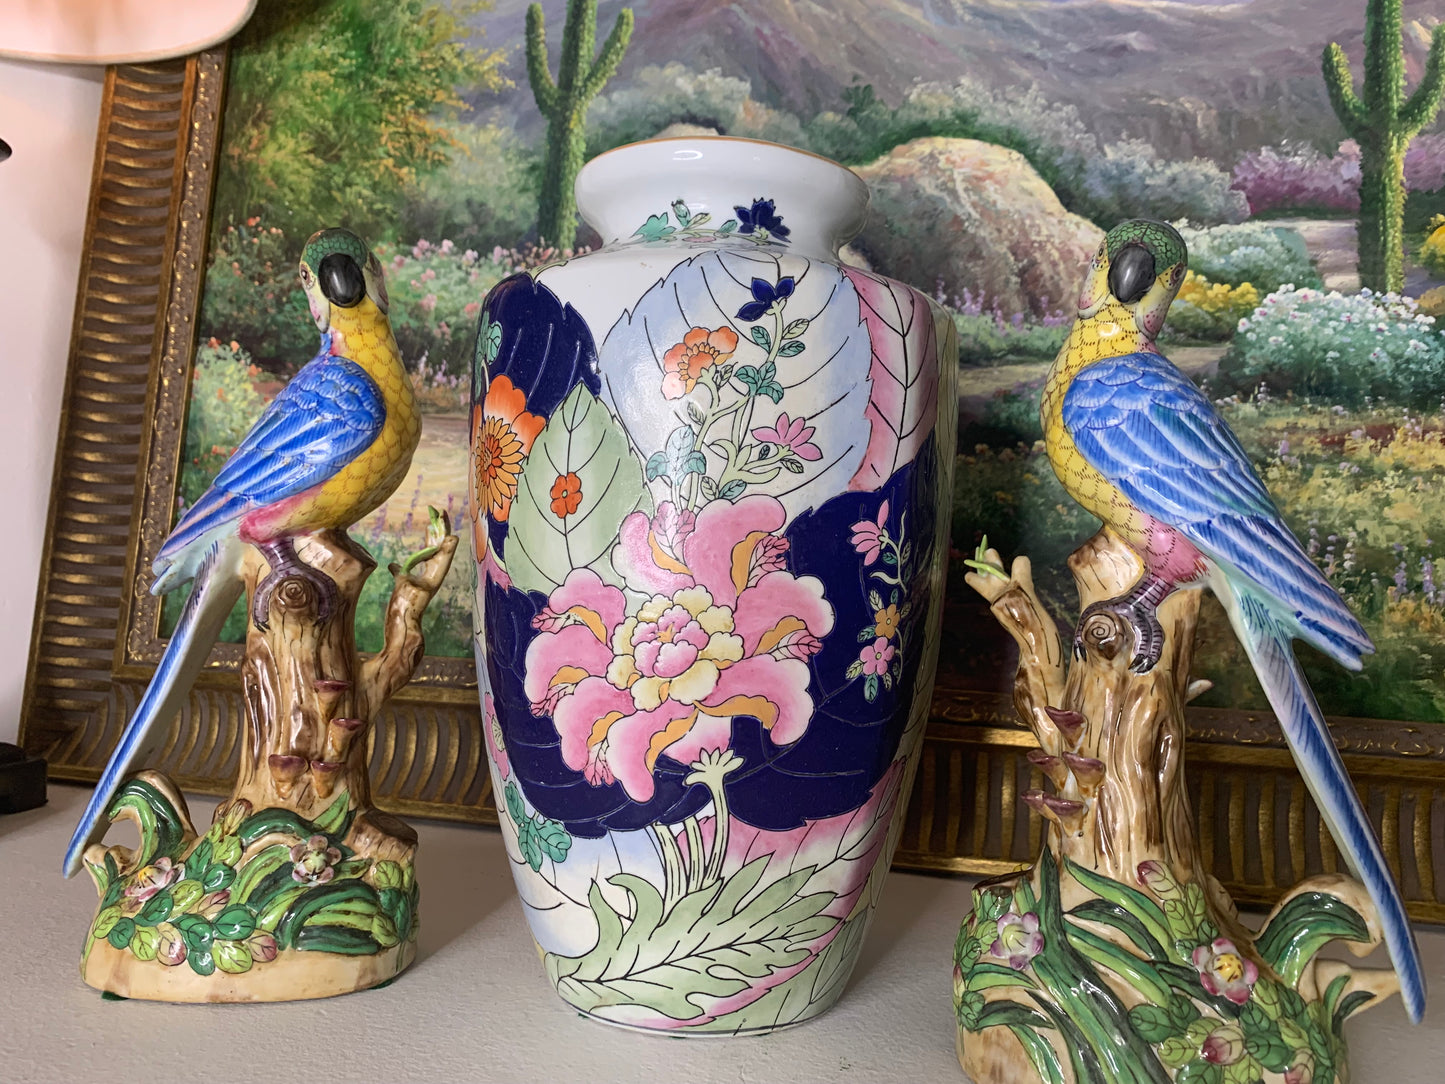 Stunning 11” tall Andrea by Sadek parrots with vivid hues, flowers, and intricate details! Excellent condition!